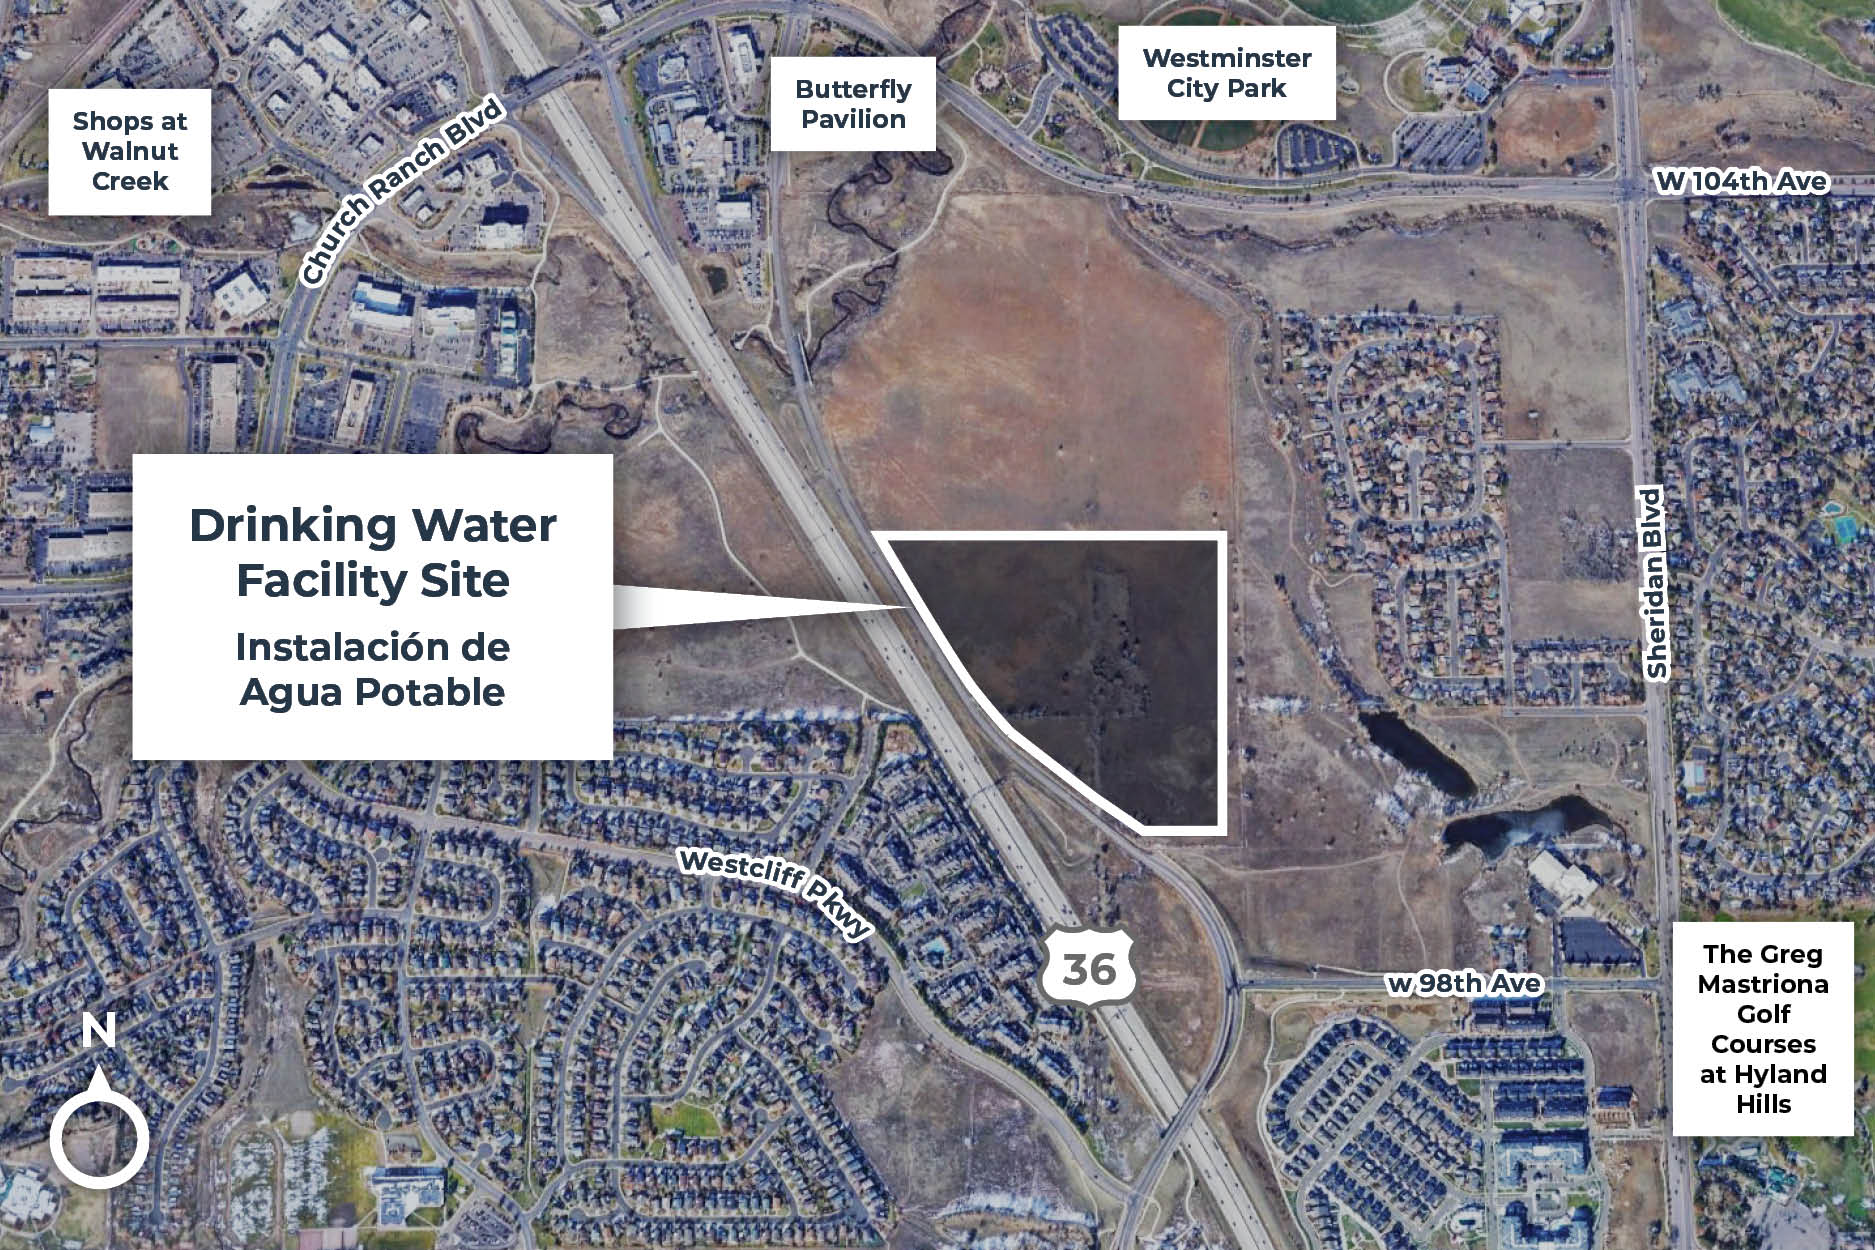 Map showing the drinking water facility site on the east side of Westminster Boulevard between 98th and 104th Avenues.